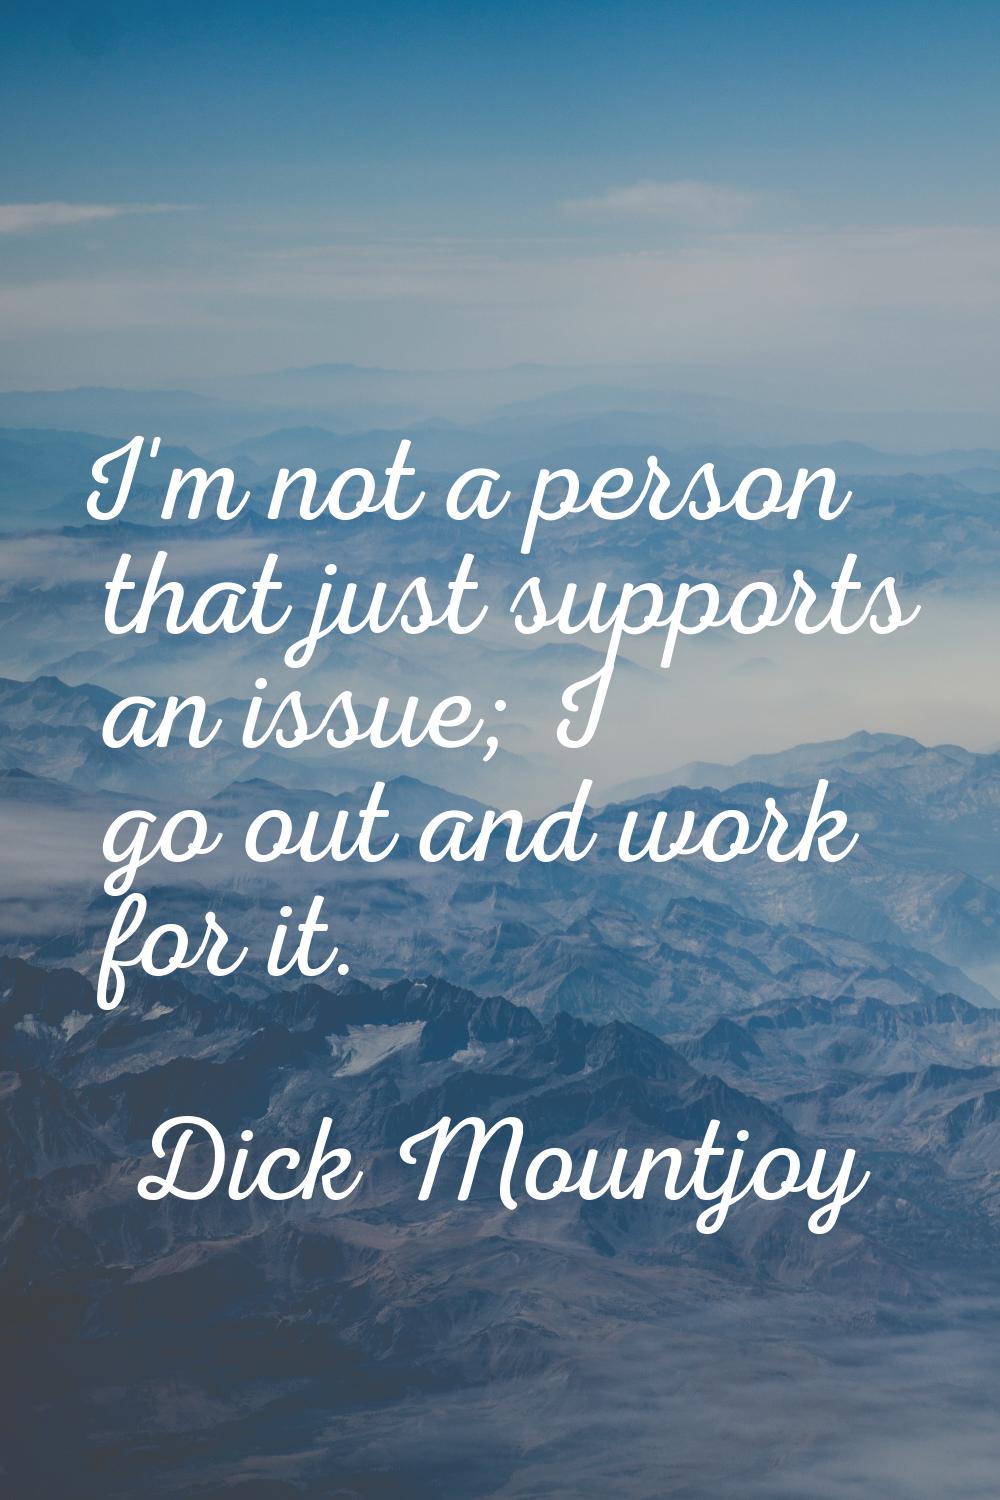 I'm not a person that just supports an issue; I go out and work for it.